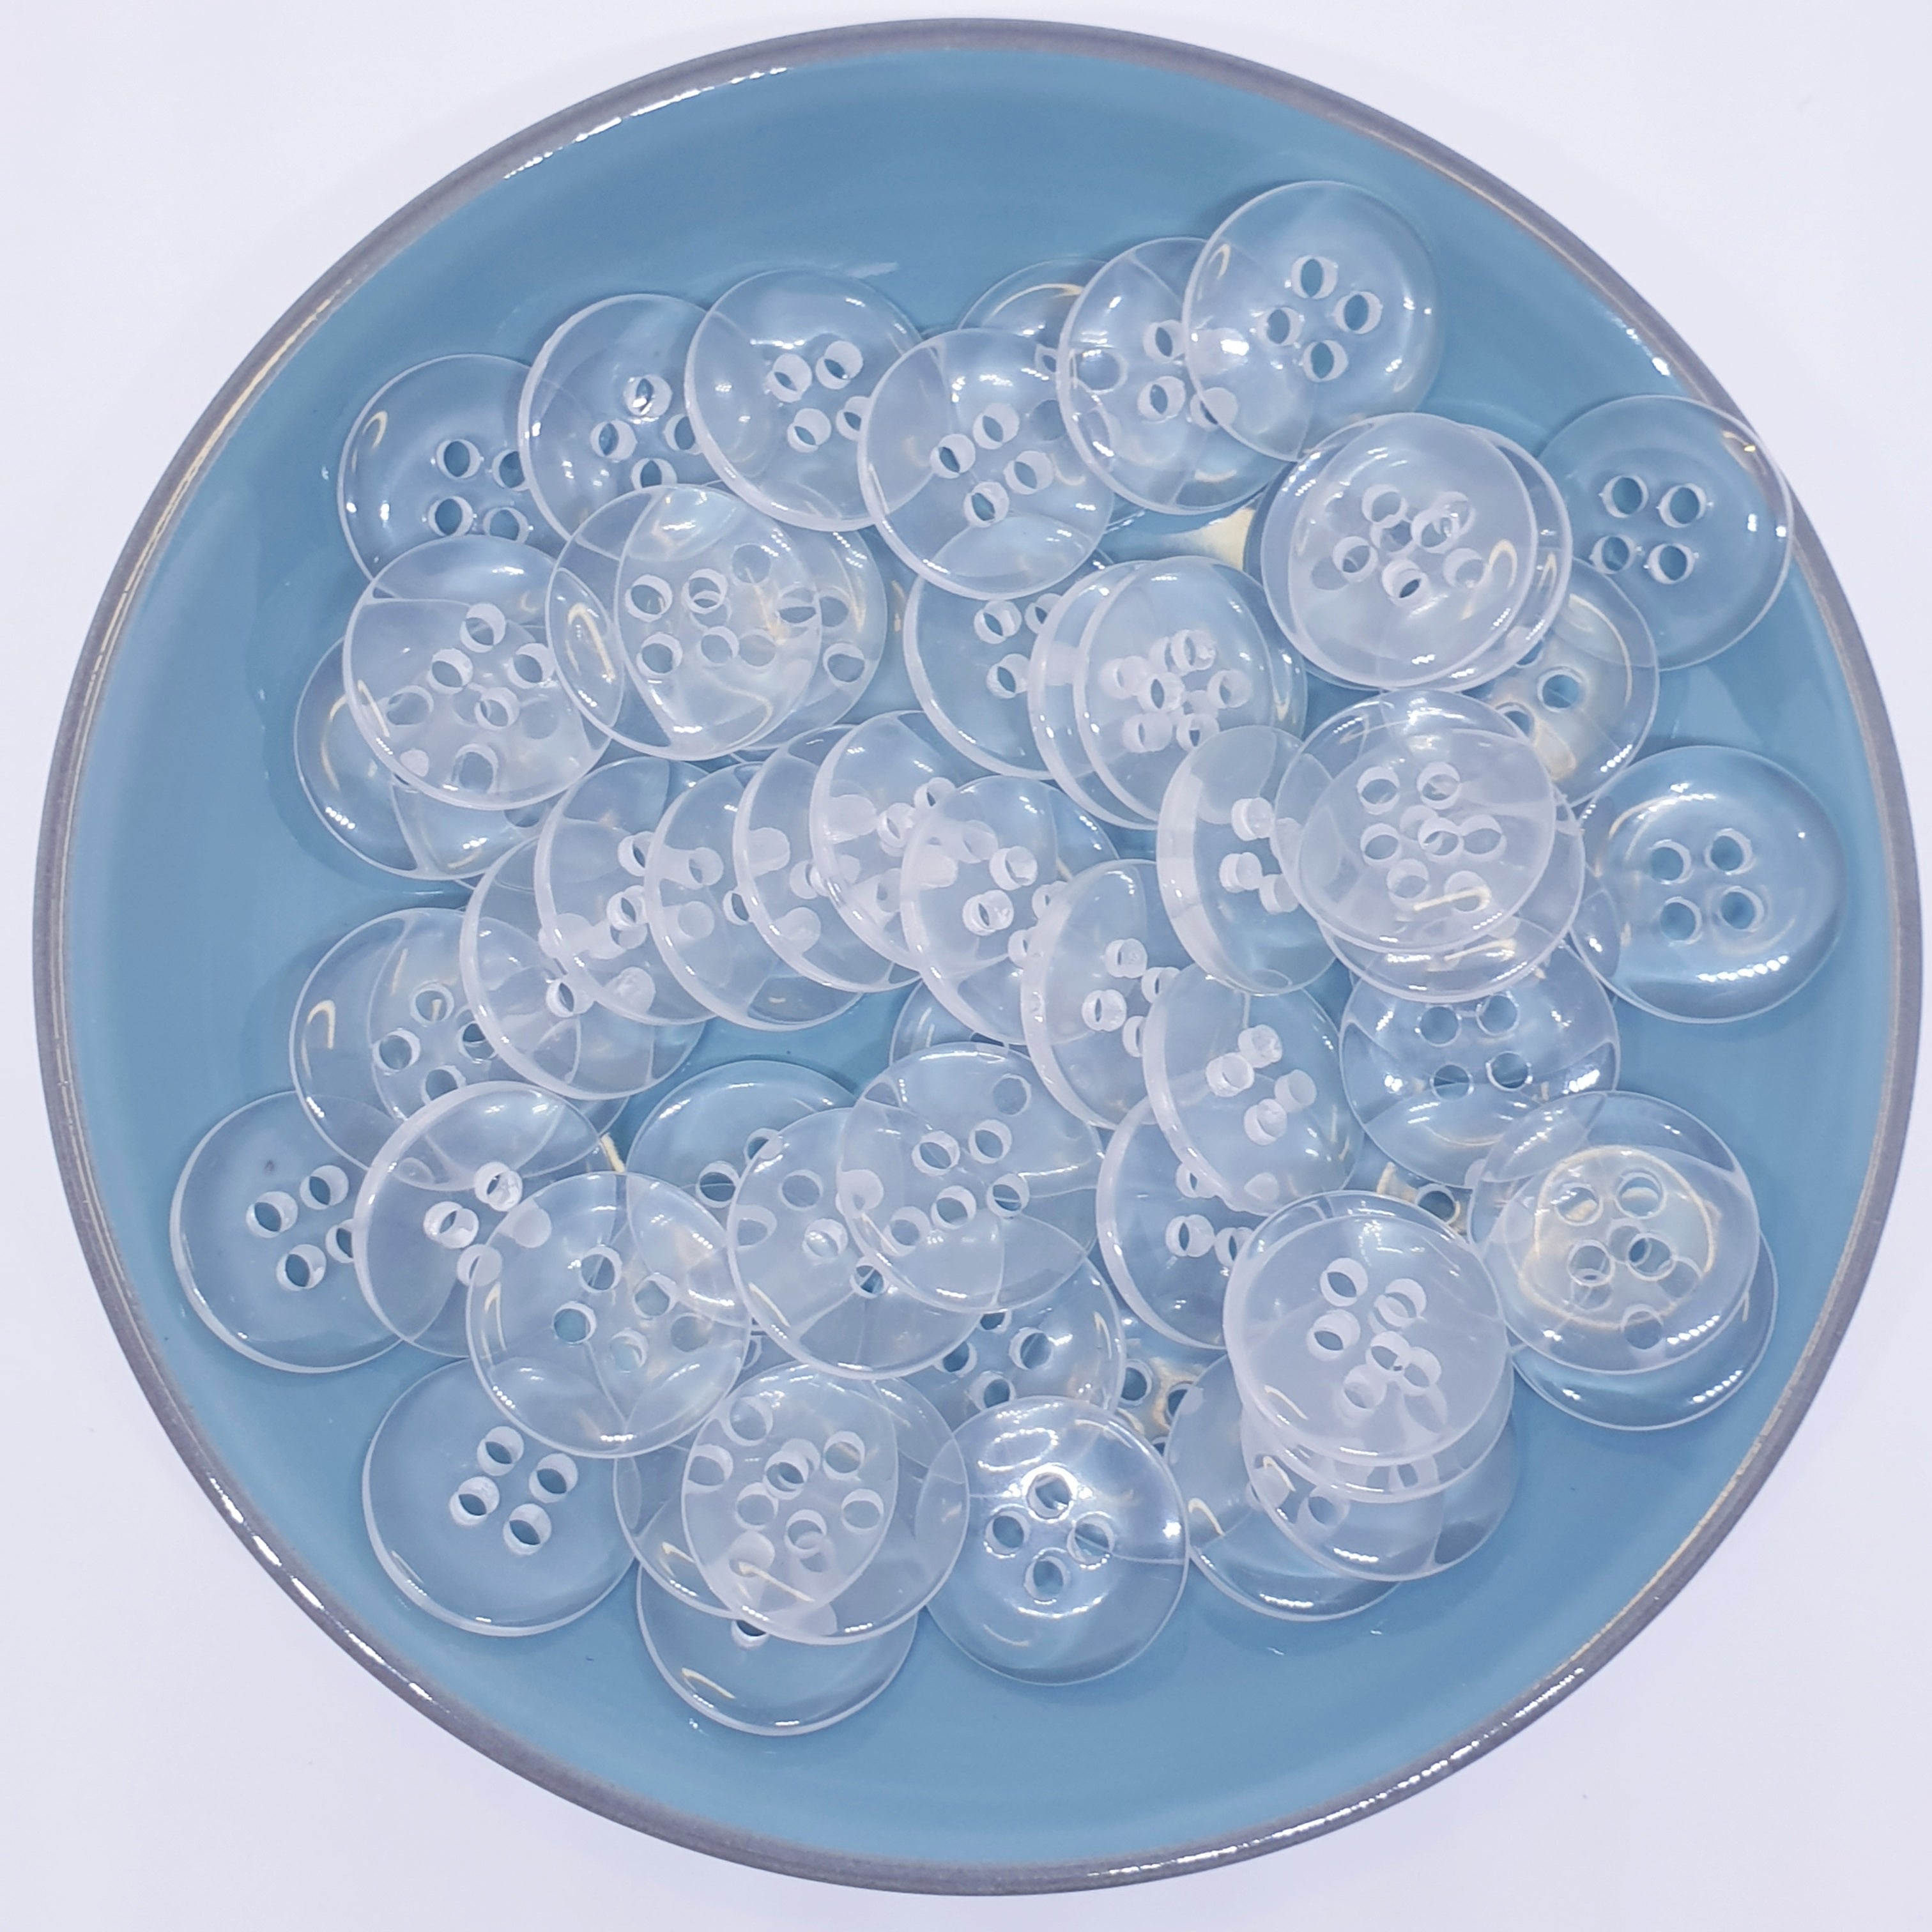 MajorCrafts 60pcs 15mm Transparent Clear 4 Holes Round Resin Sewing Buttons